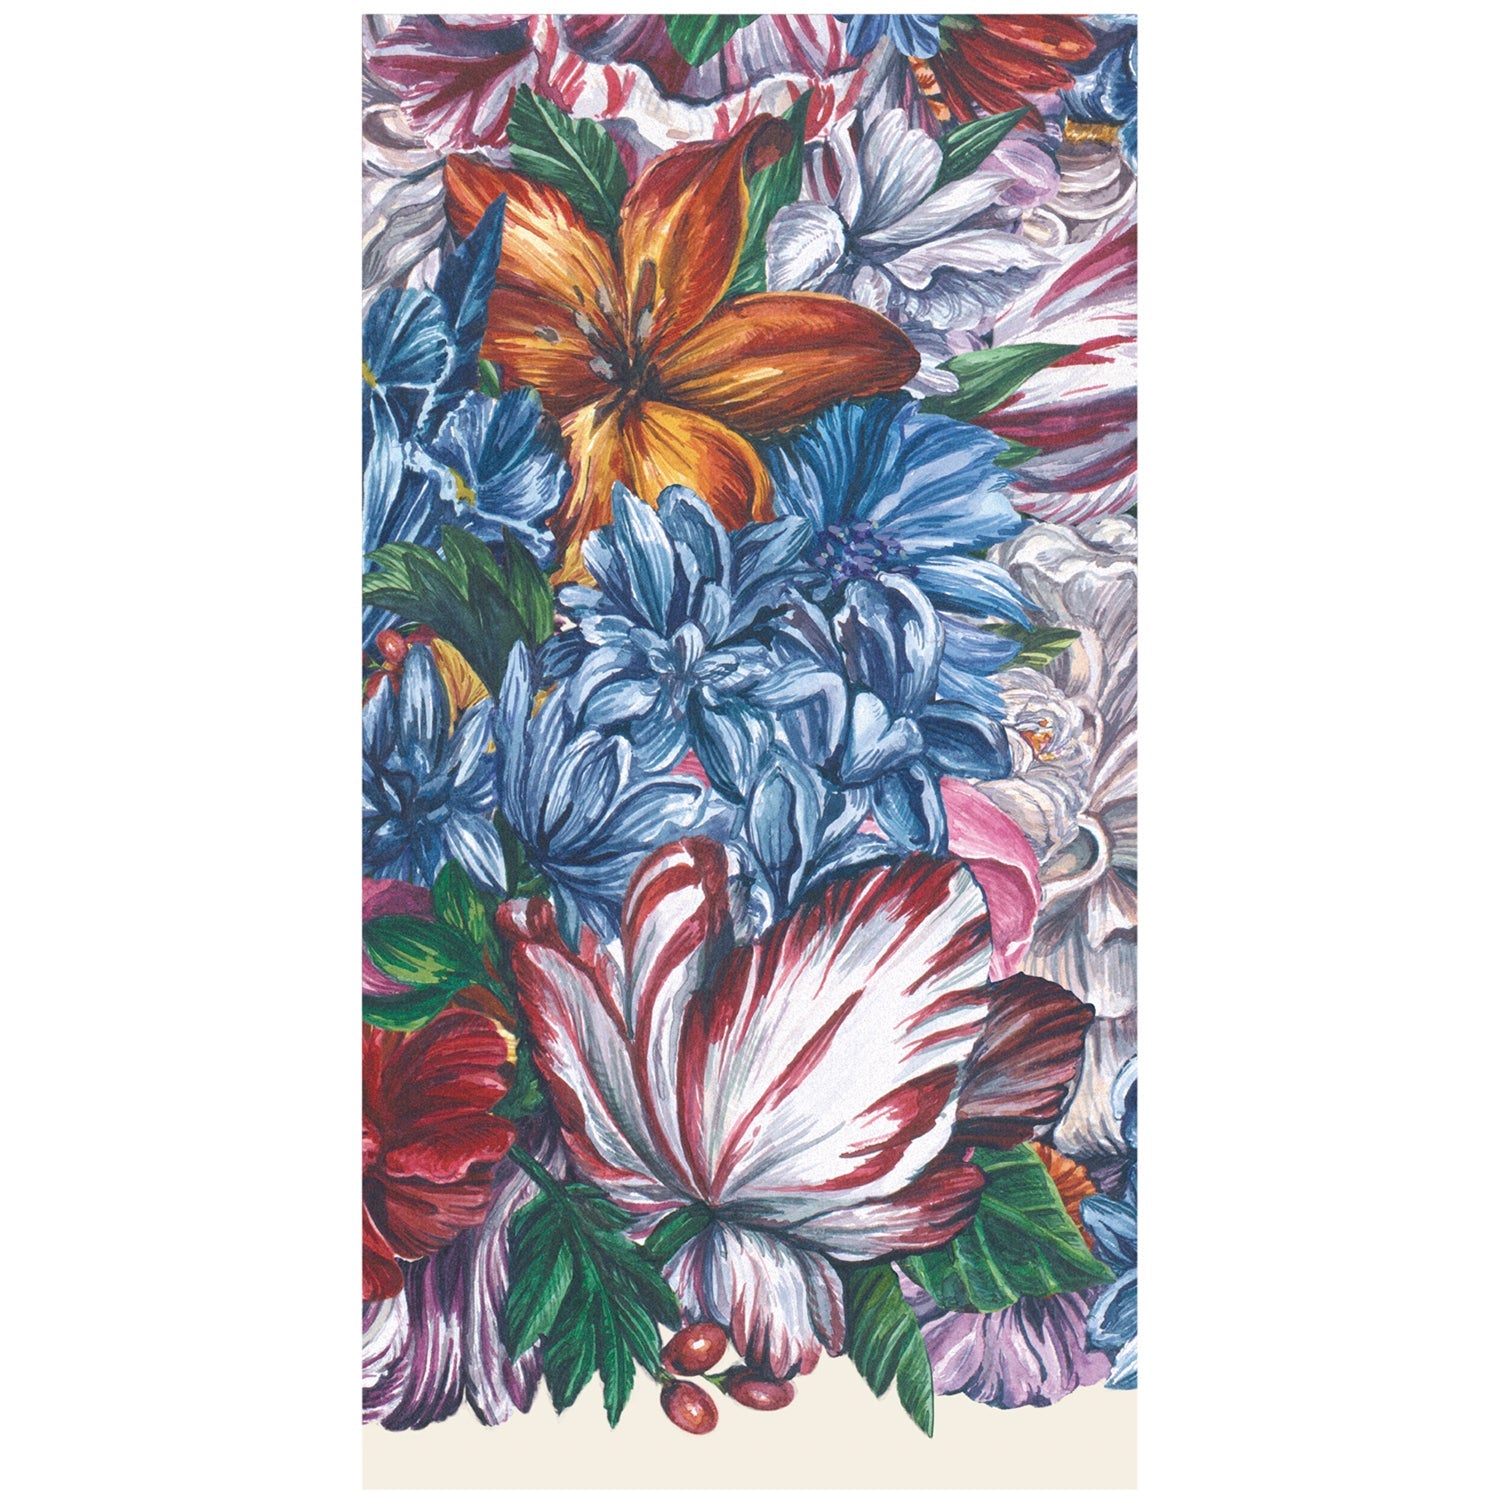 A Dutch Floral Napkins from Hester &amp; Cook with colorful flowers on it.